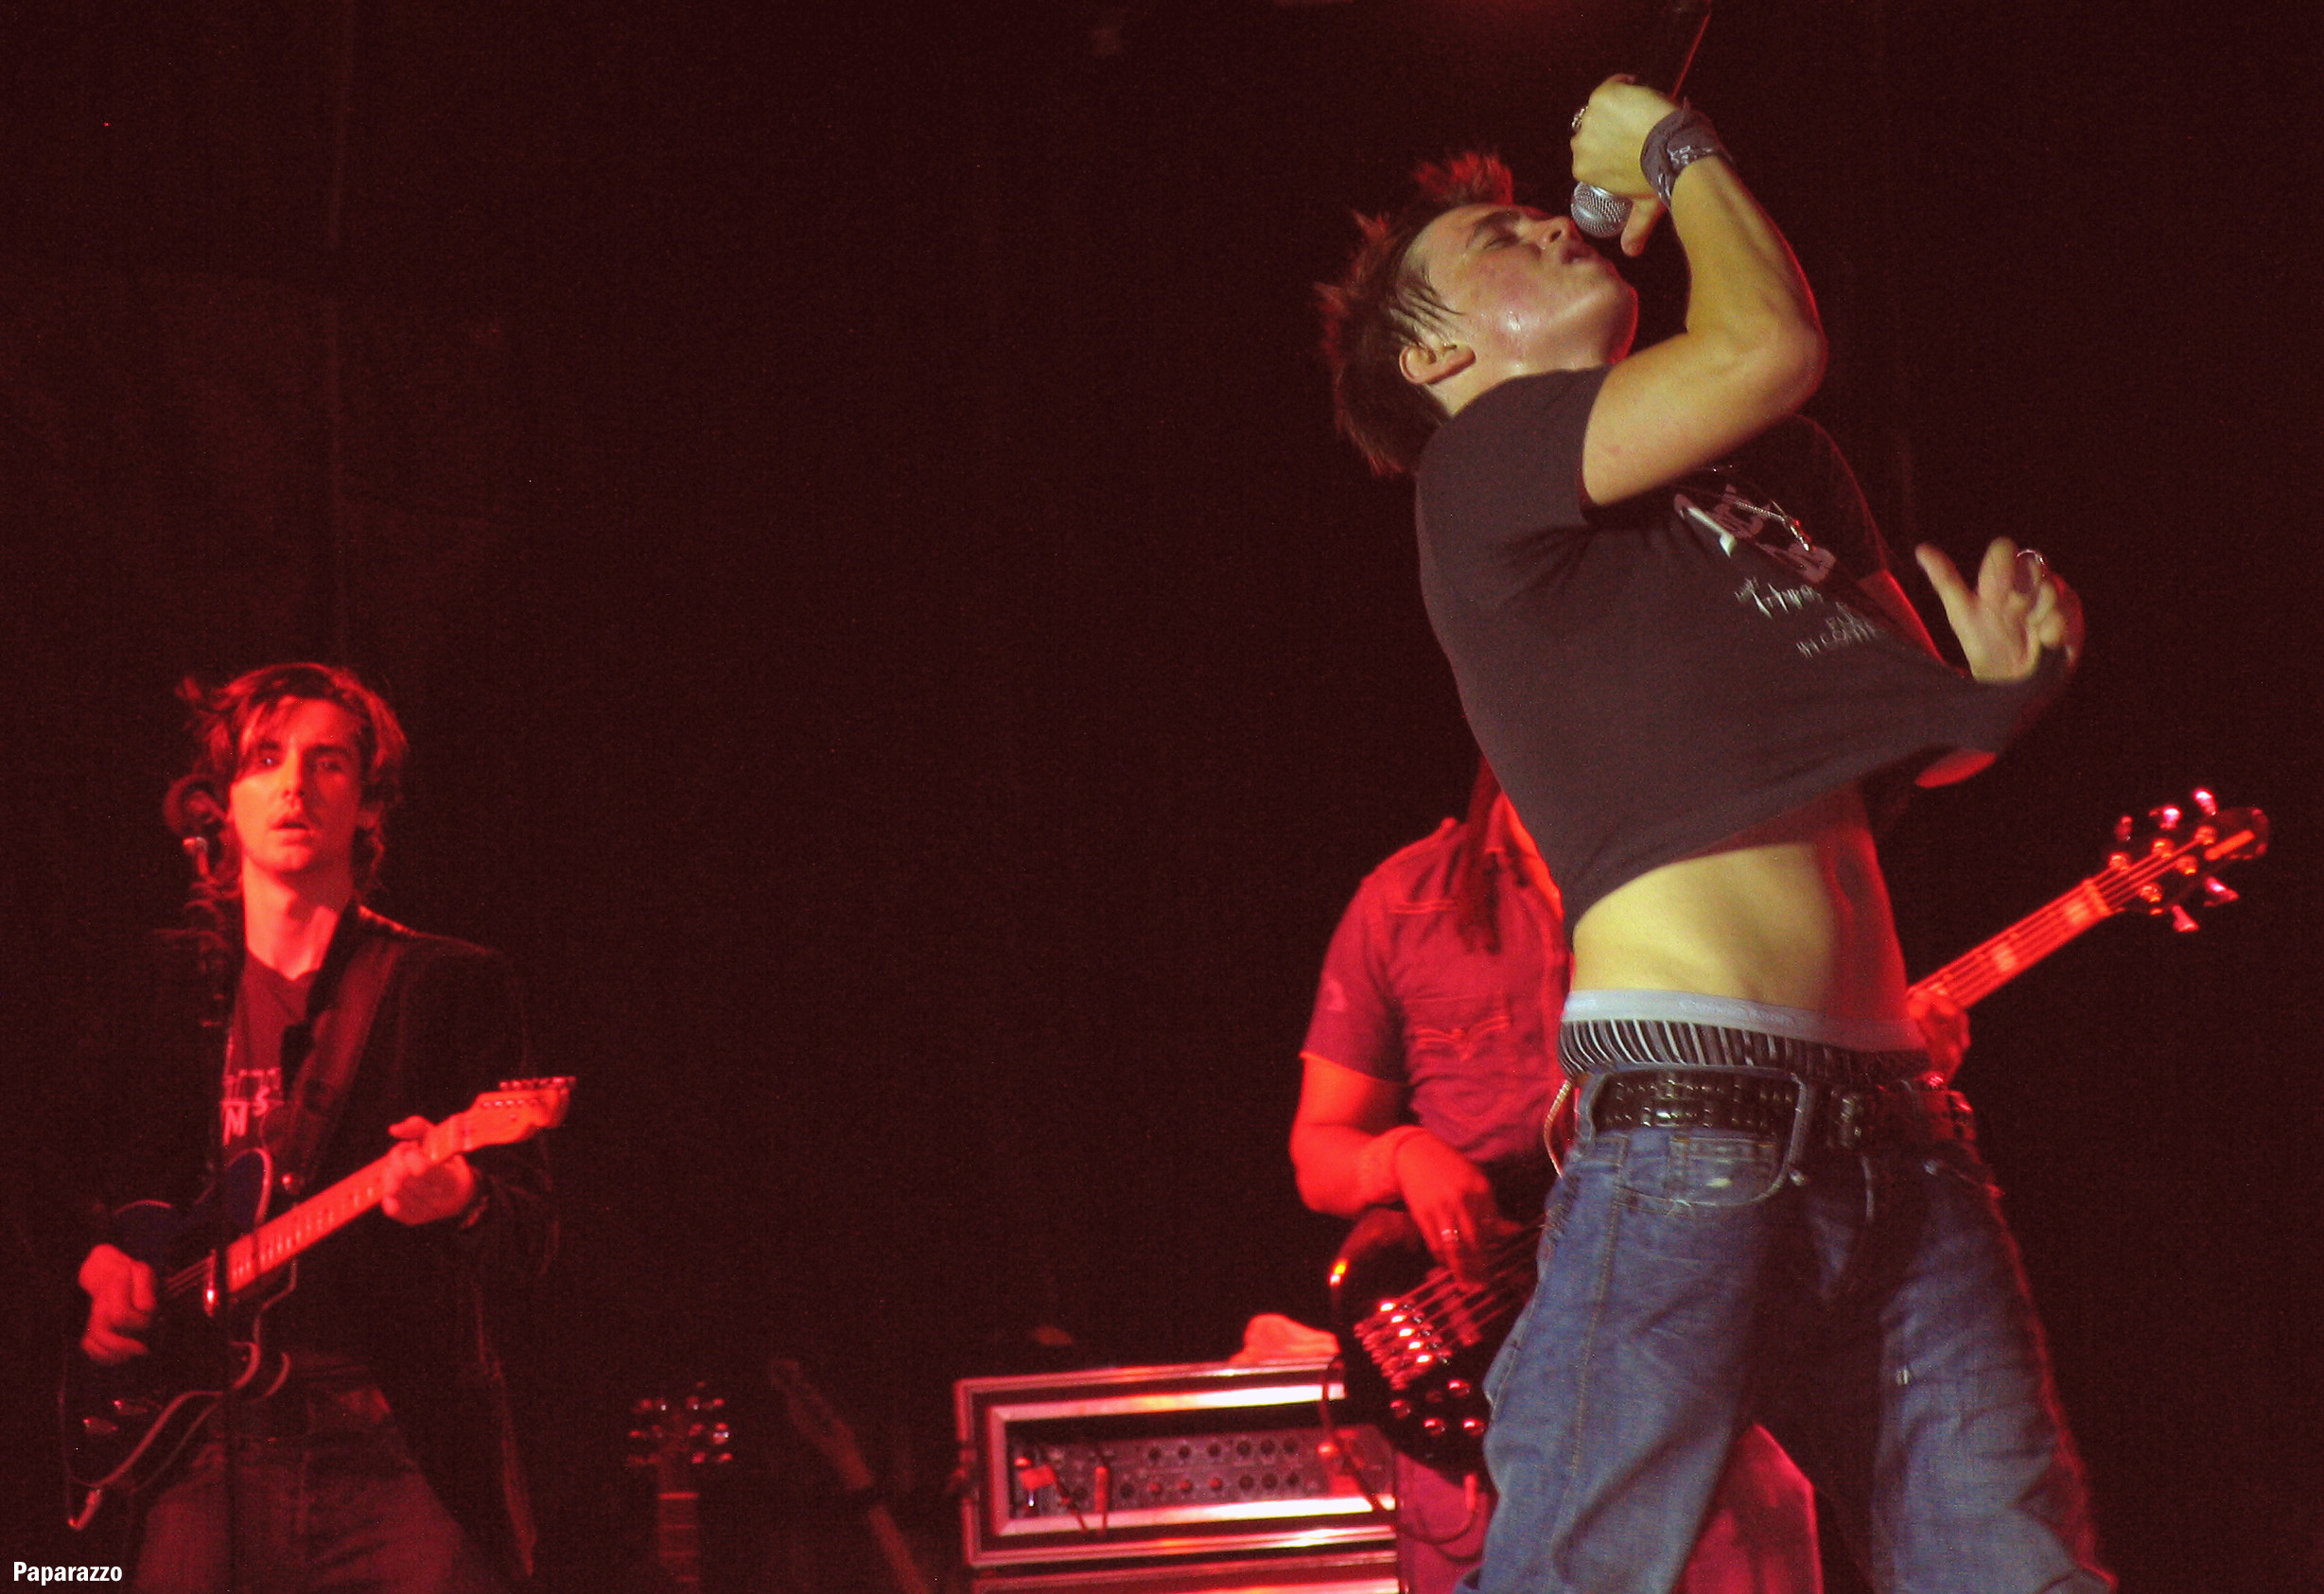 2457x1685 Paparazzo presents a photo from Jesse McCartneys concert on August 5, 2006  in Baton Rouge